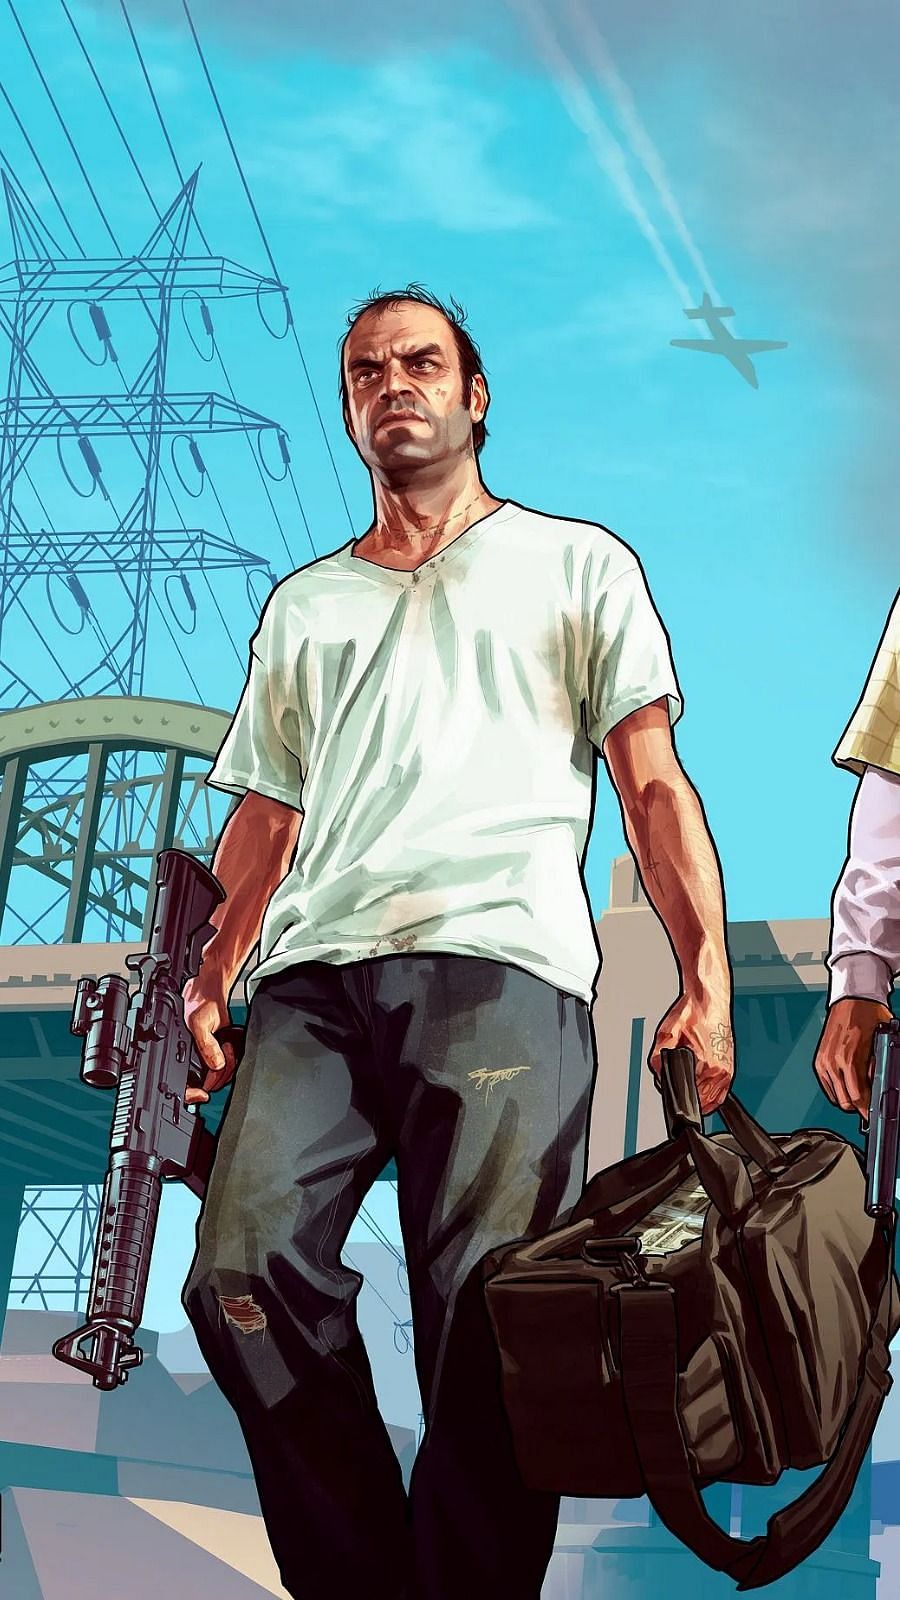 The 5 best-selling GTA games of all time